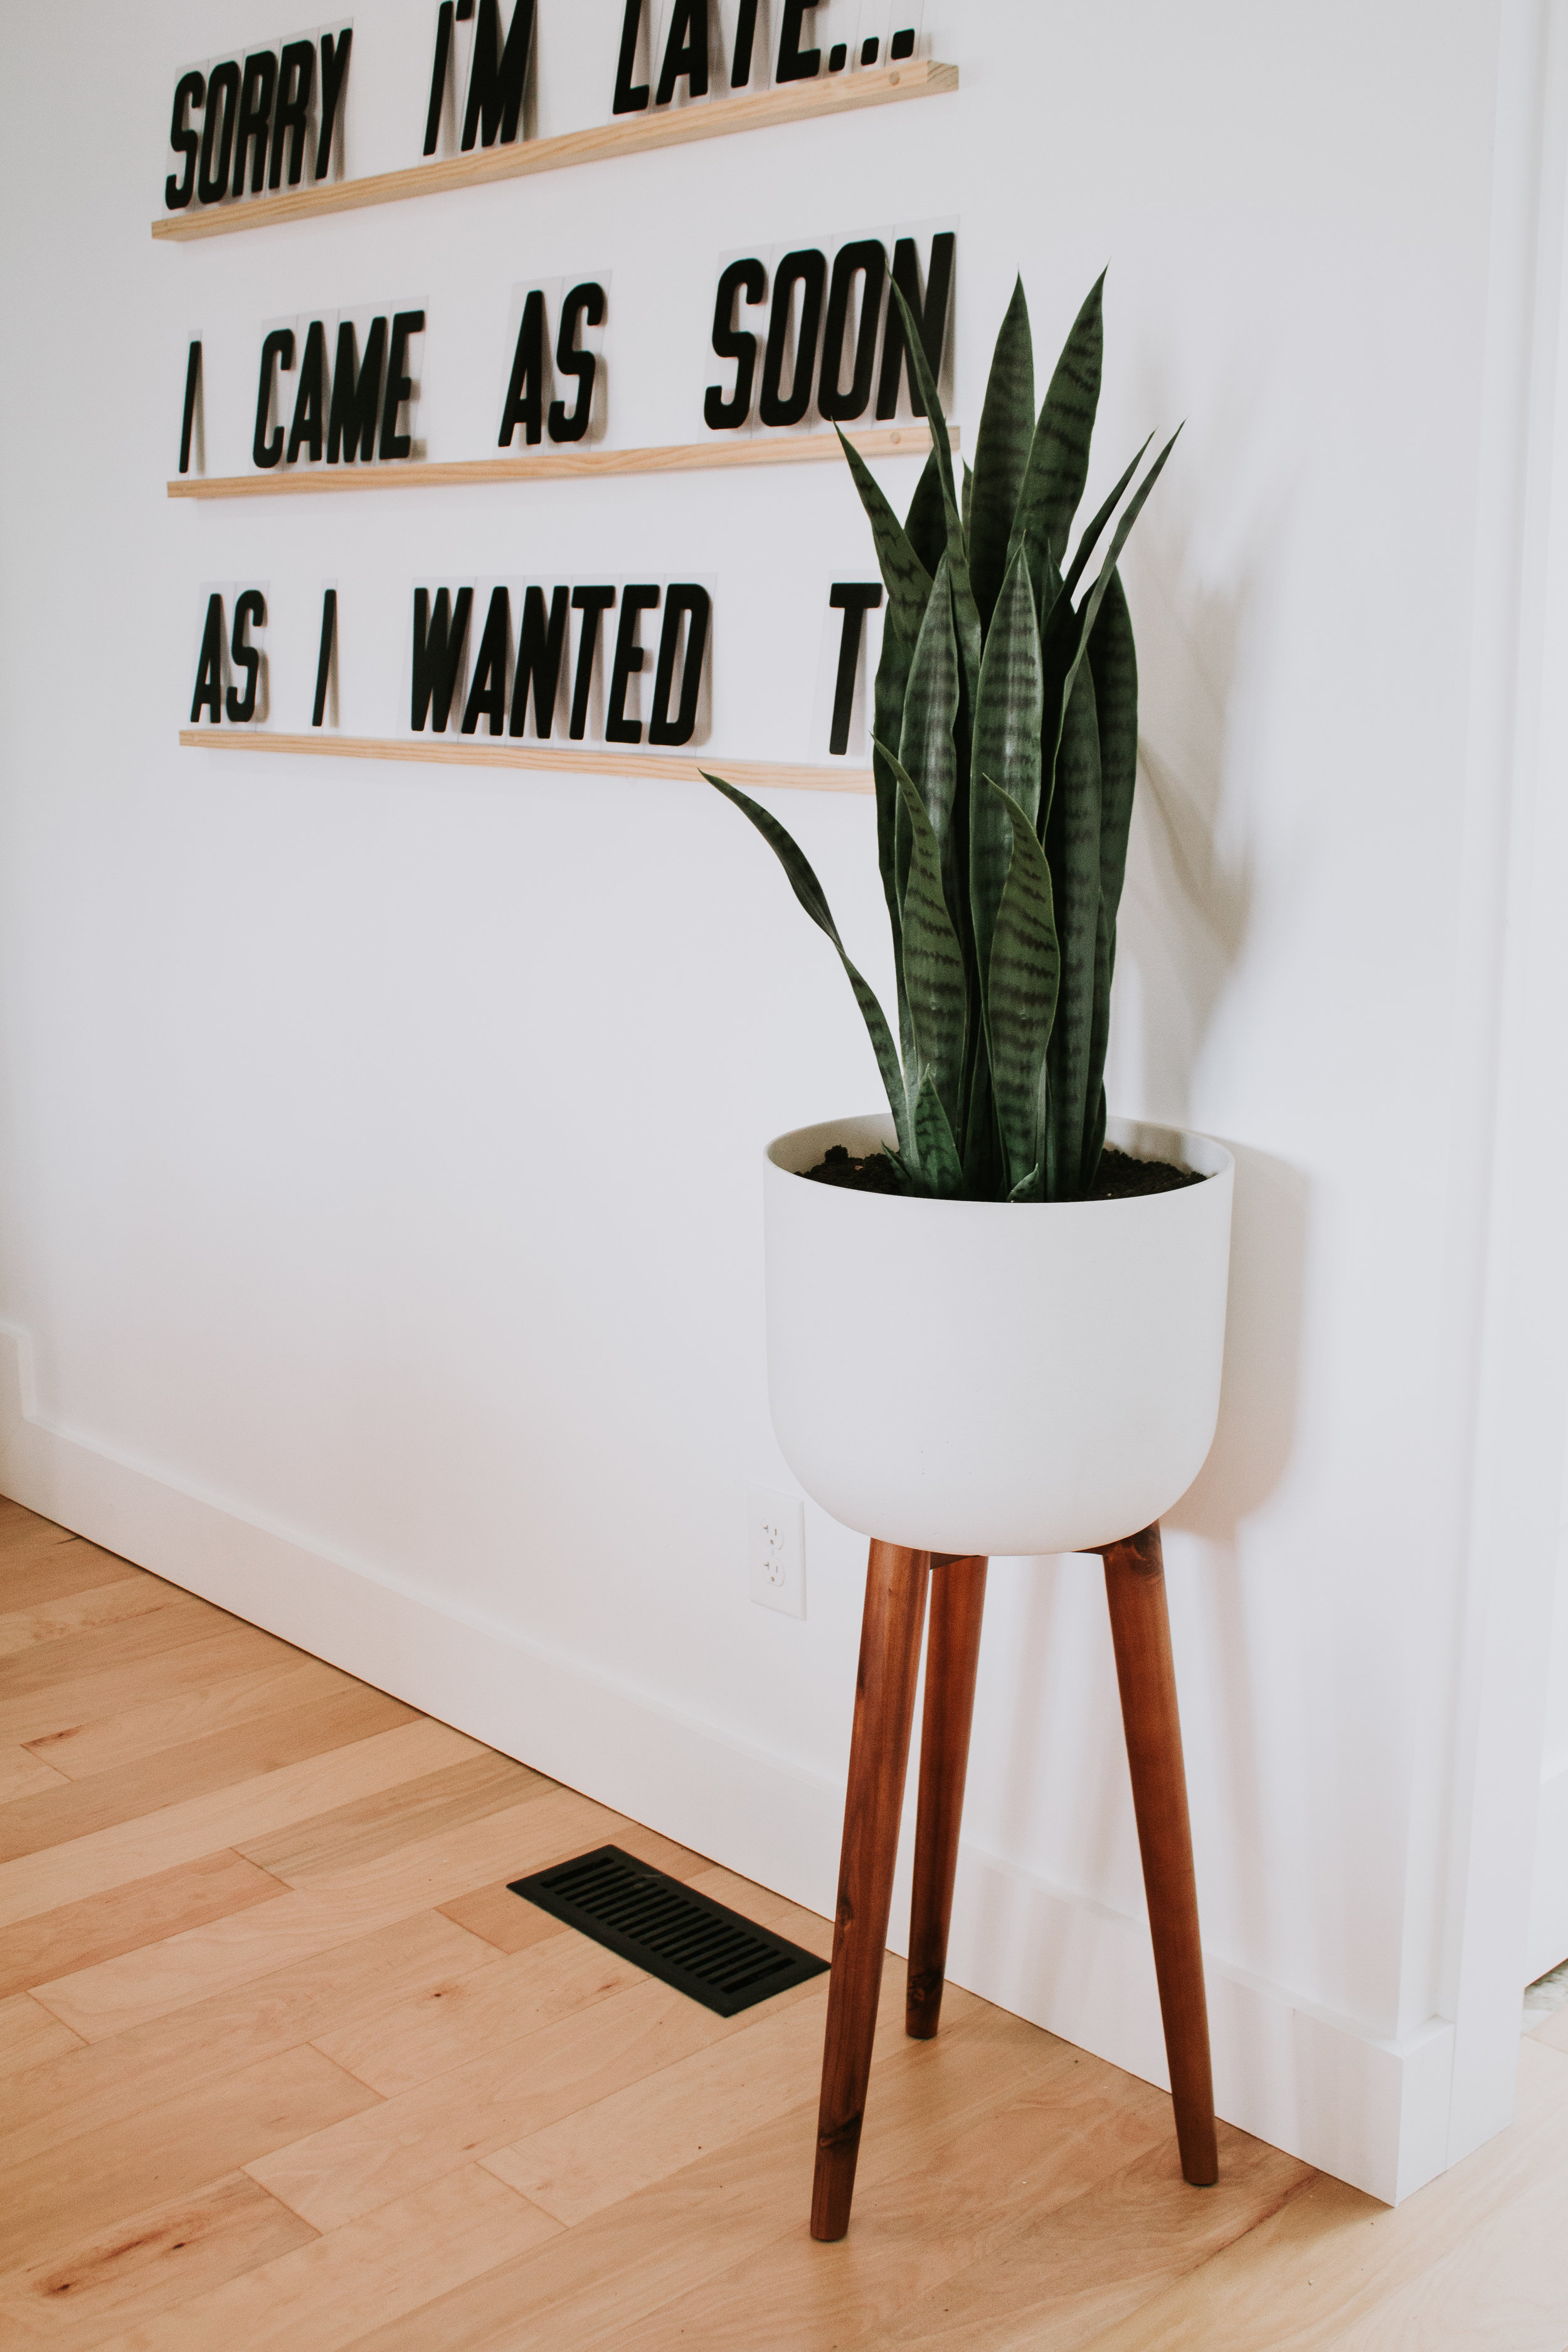 How to make a faux plant look real - DIY by Nadine Stay.  Interior design tips for fake plants. Use supplies you have in your home to make a faux plant look real.